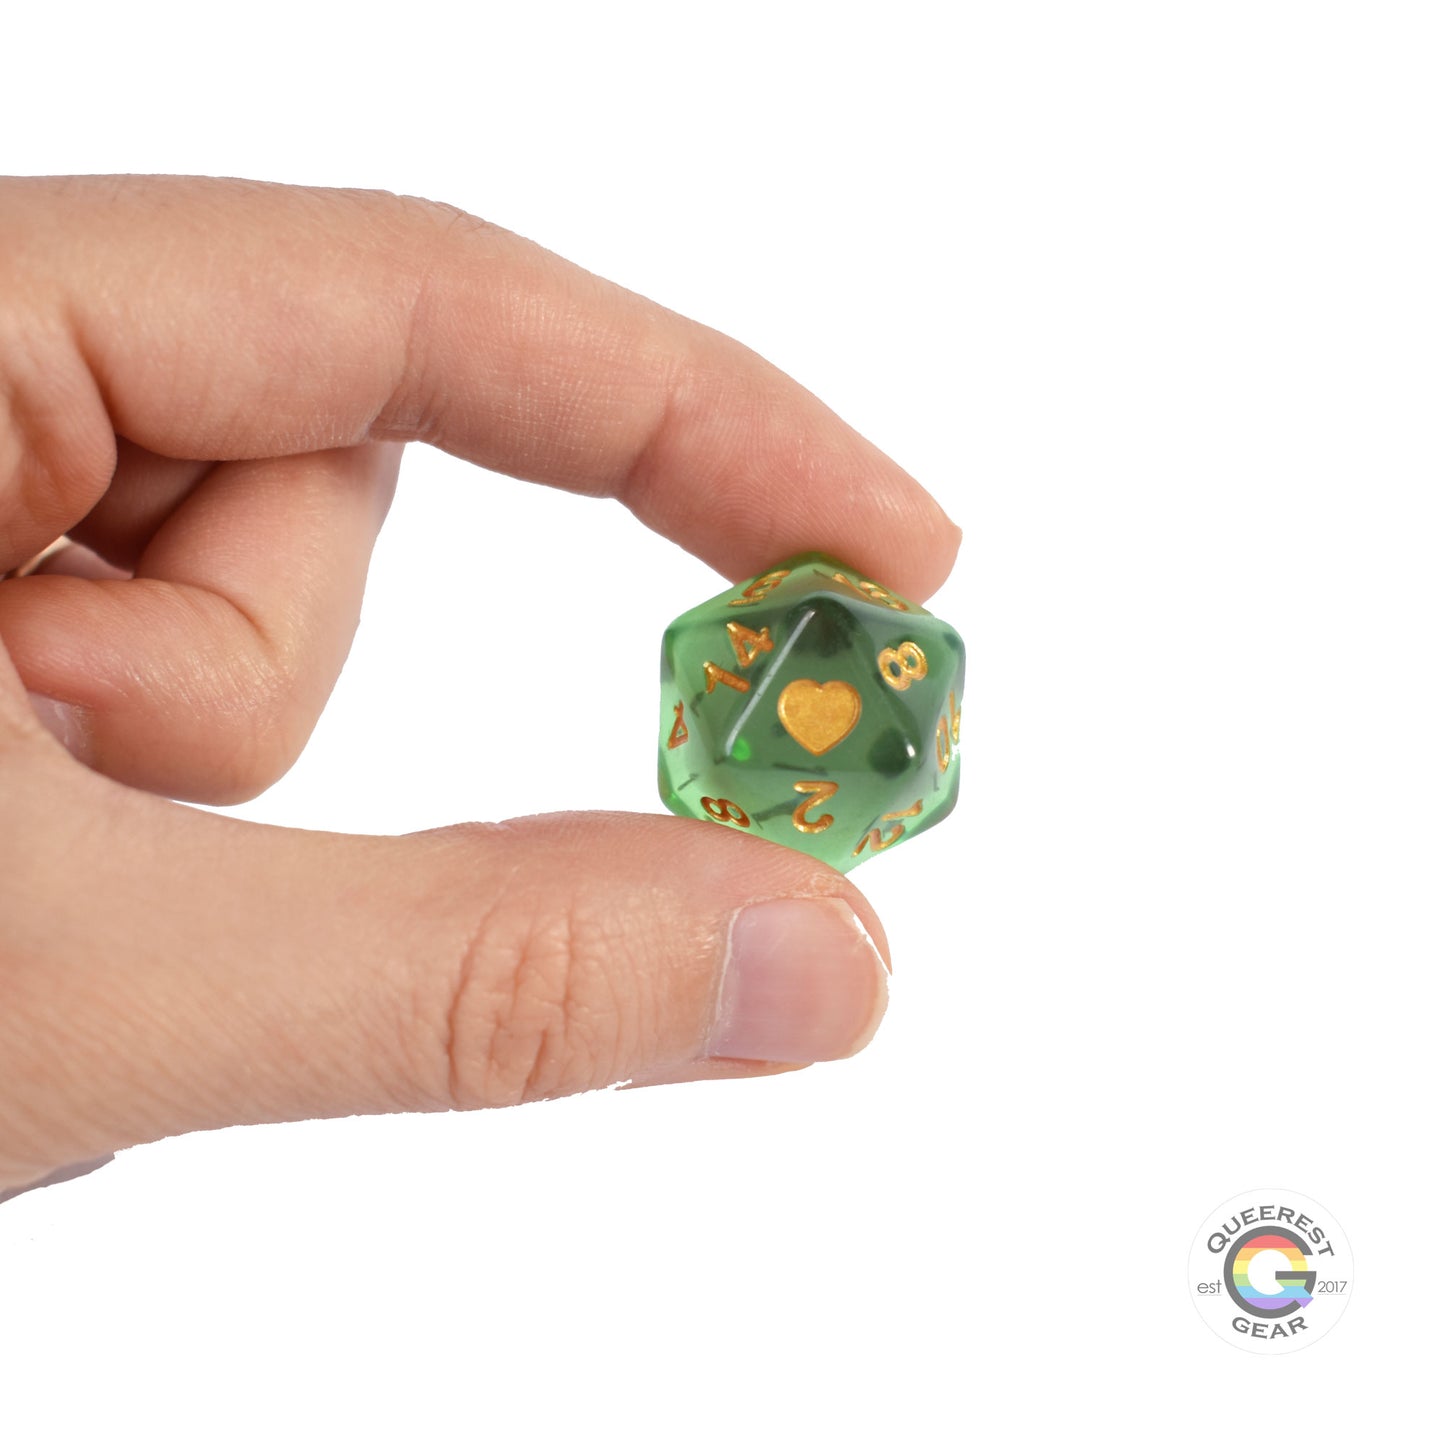 A hand holding up the d20 die to show off the heart, color, and transparency